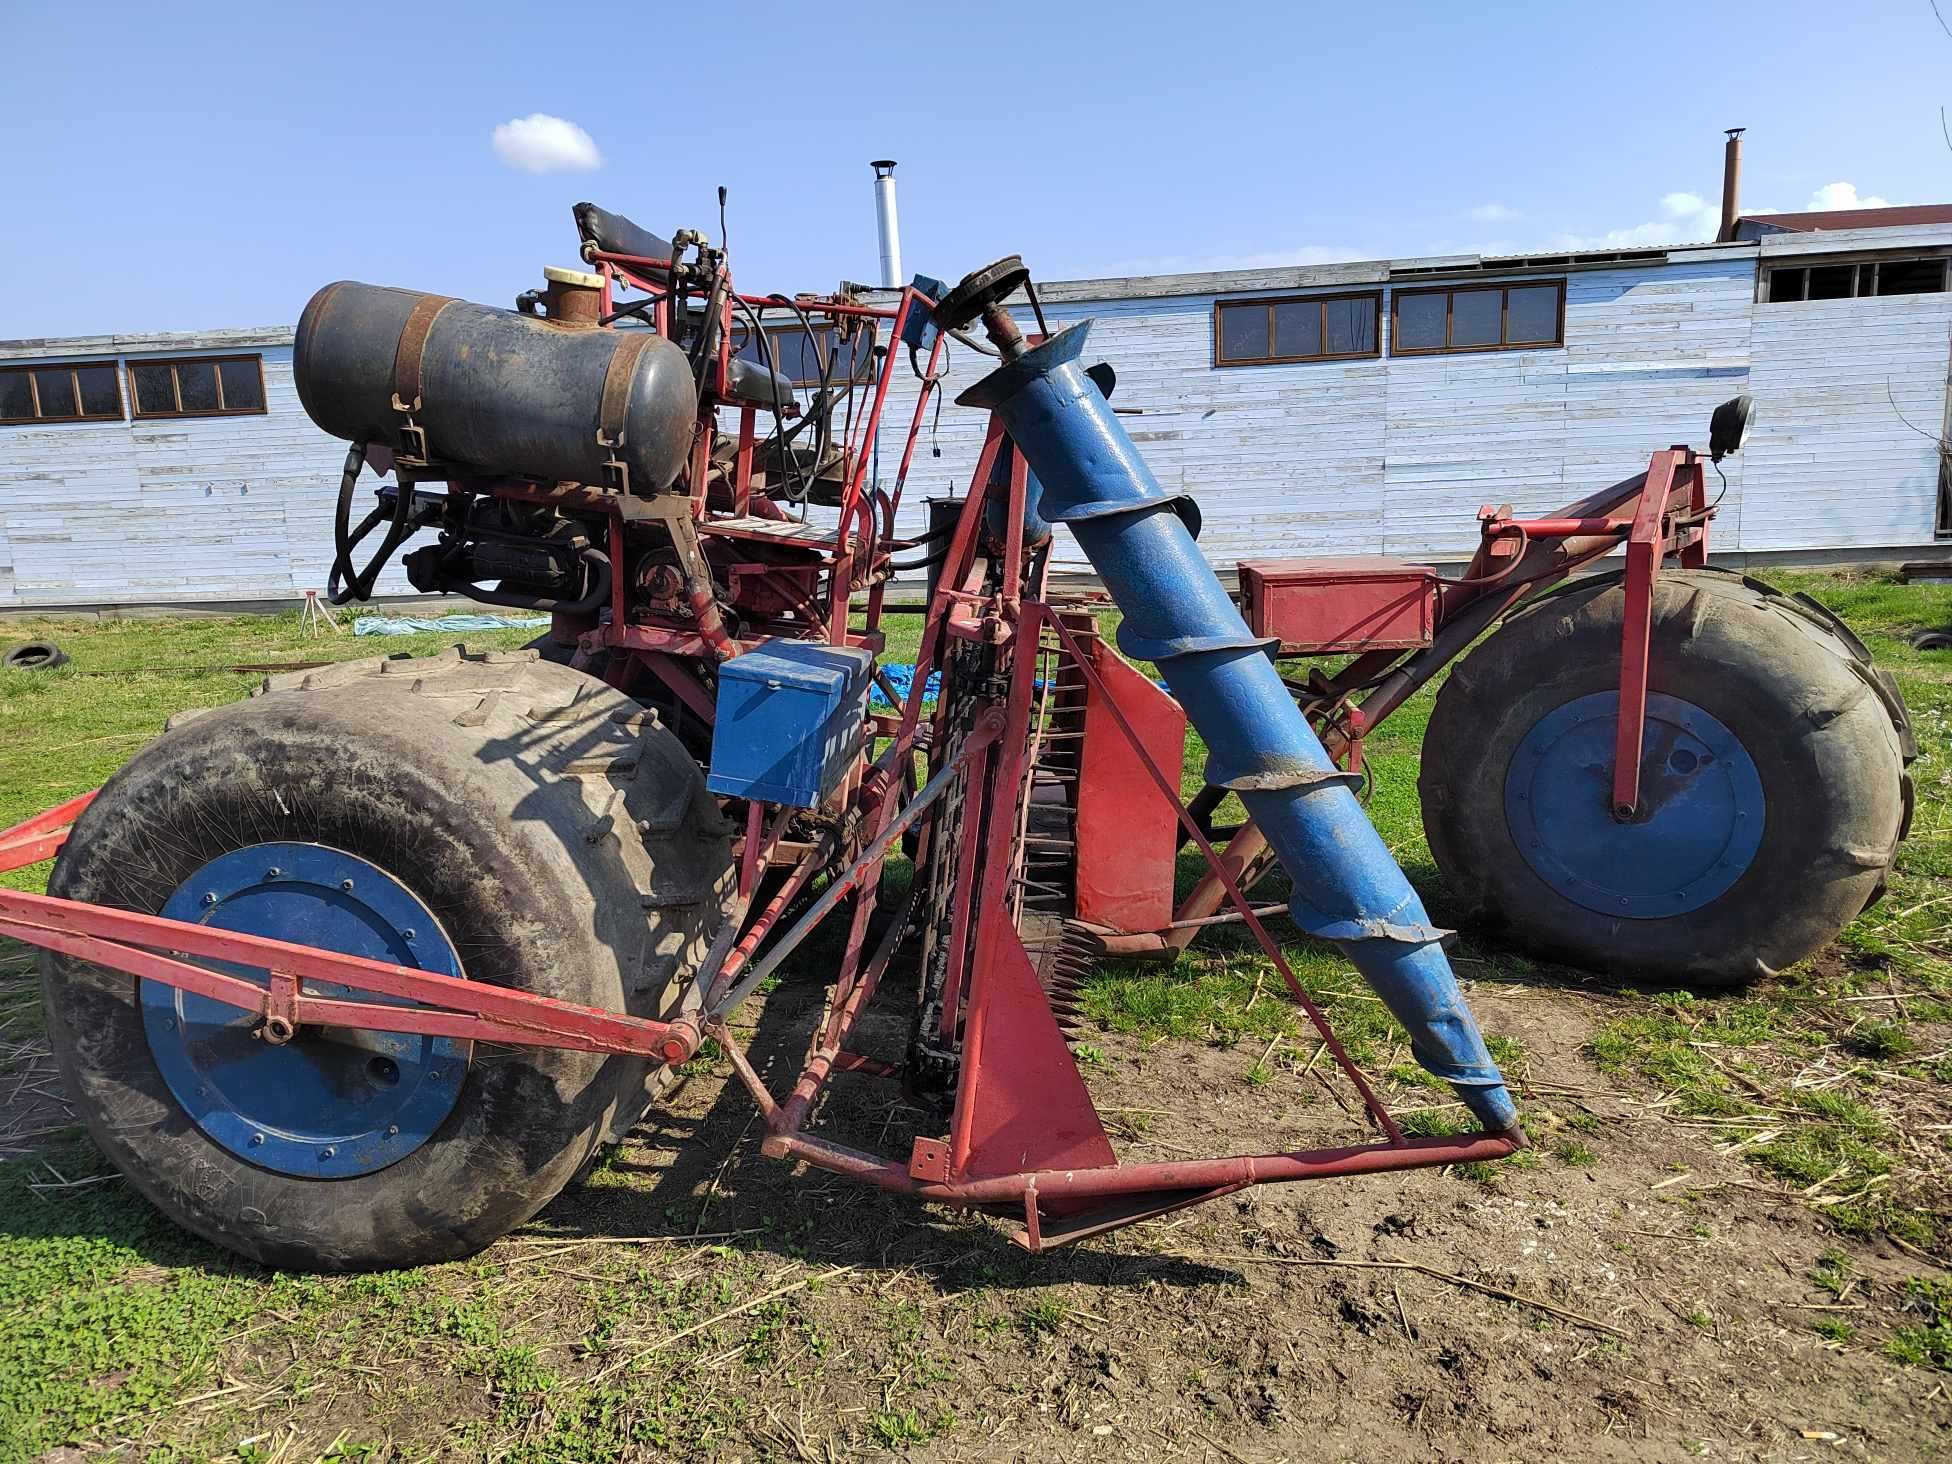 Seiga reed harvester machine with 3 wheels